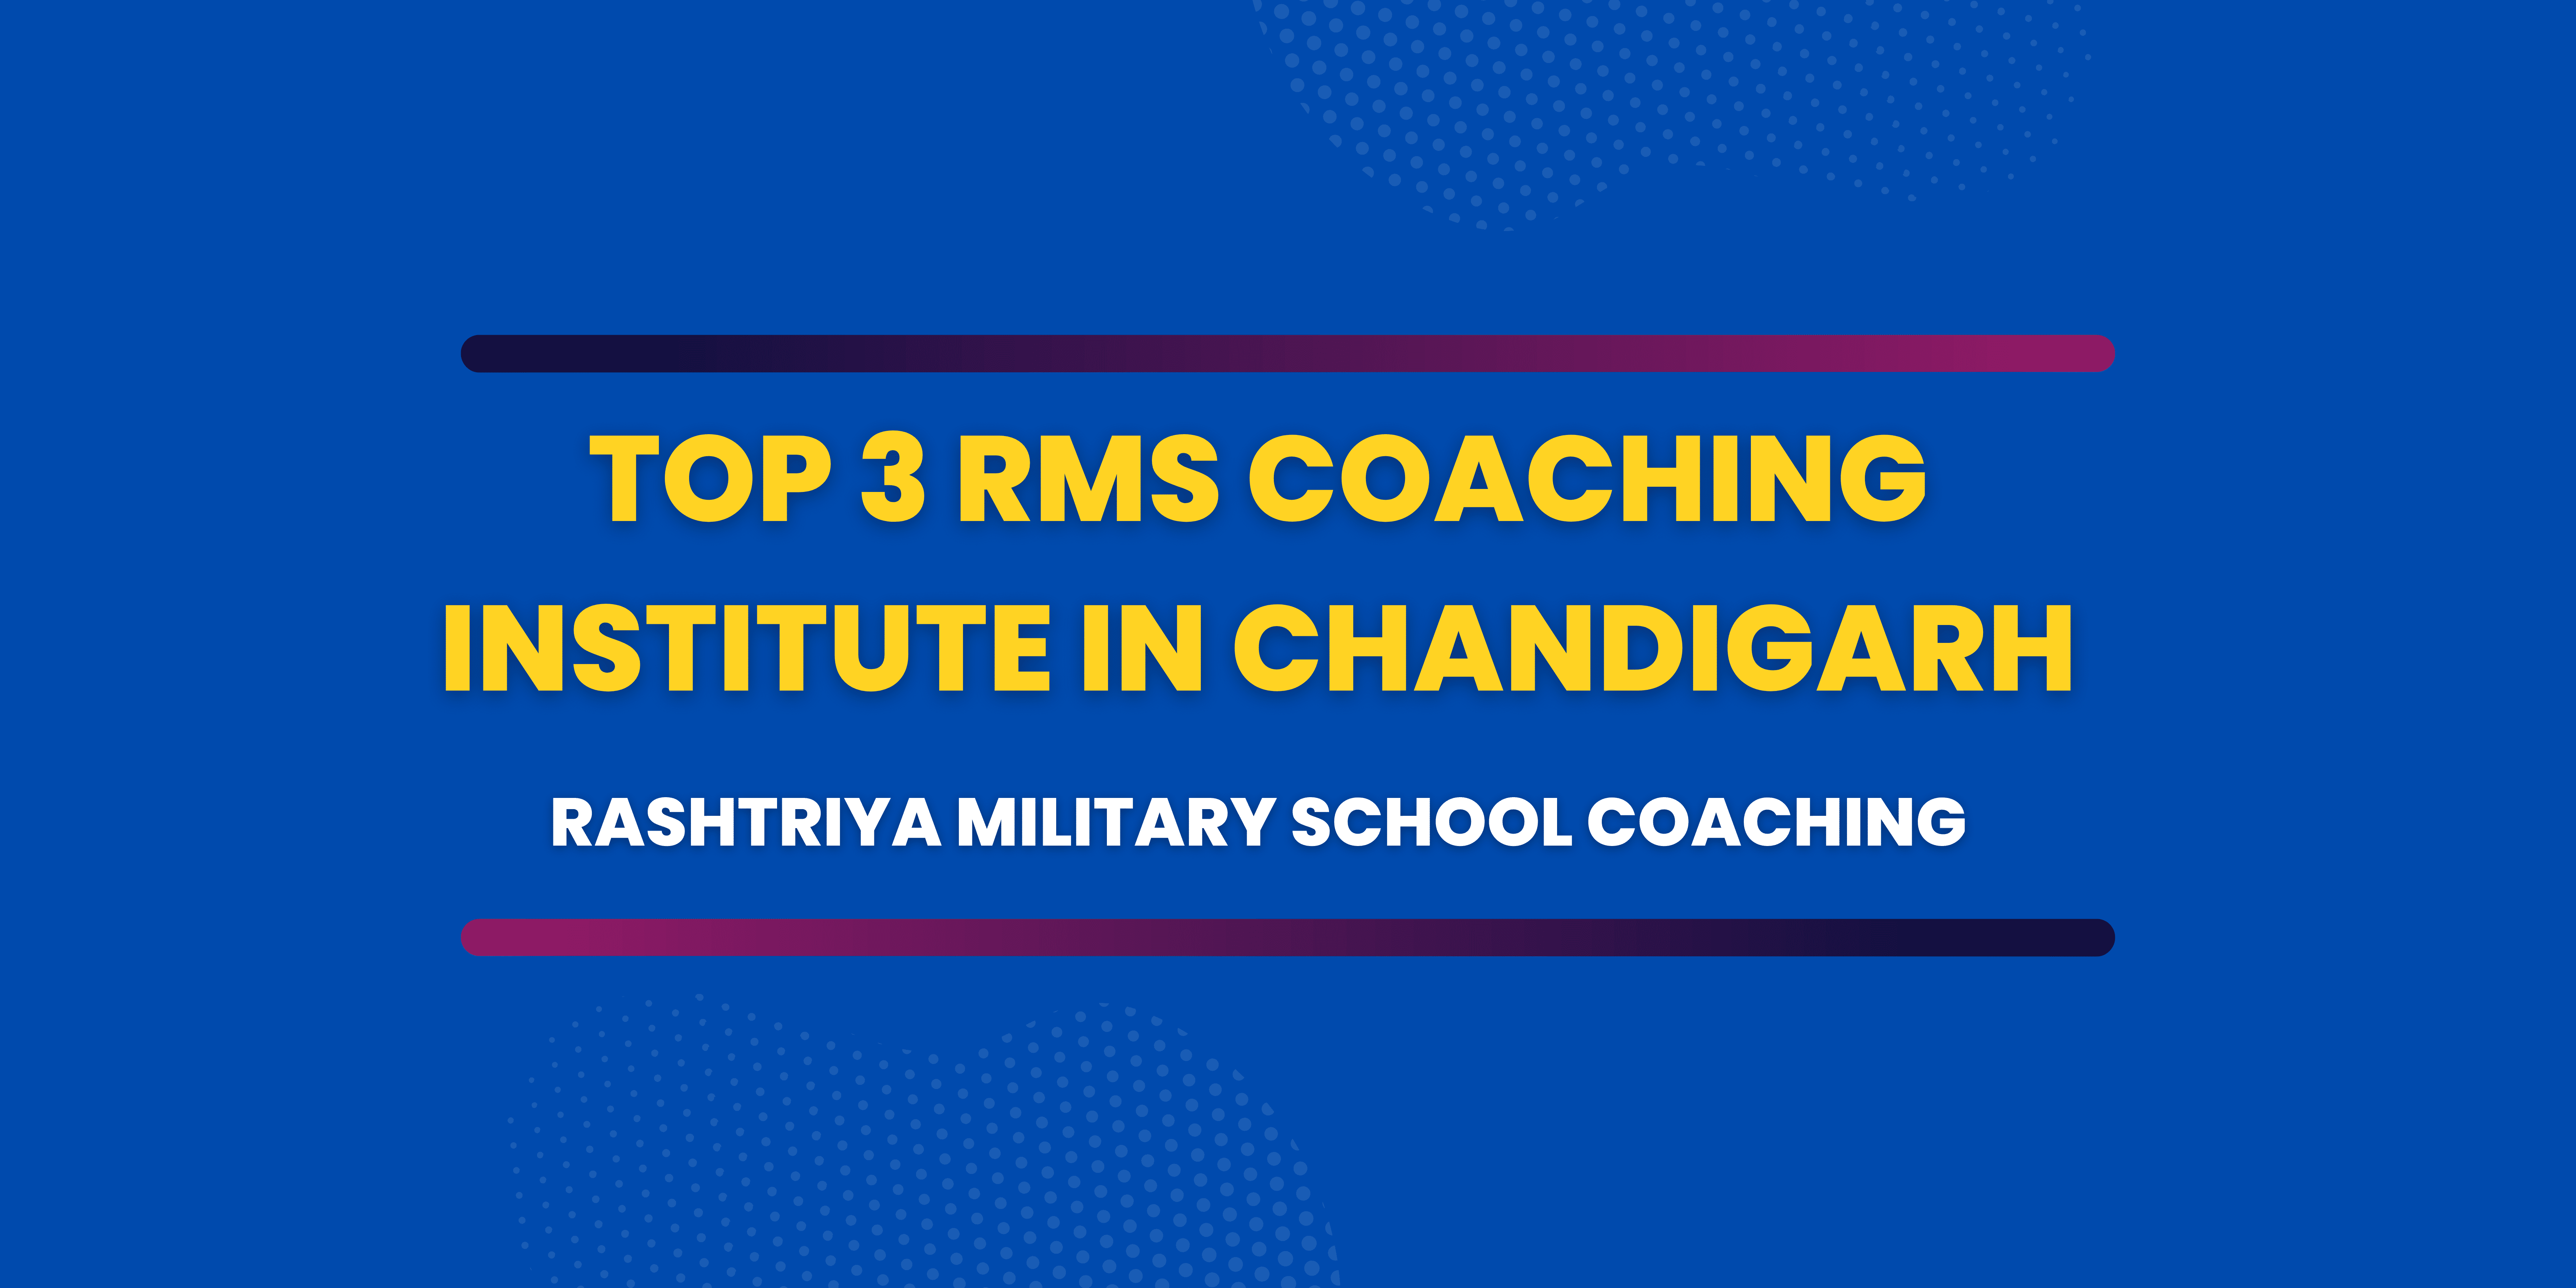 Top 3 RMS Coaching Institute in Chandigarh